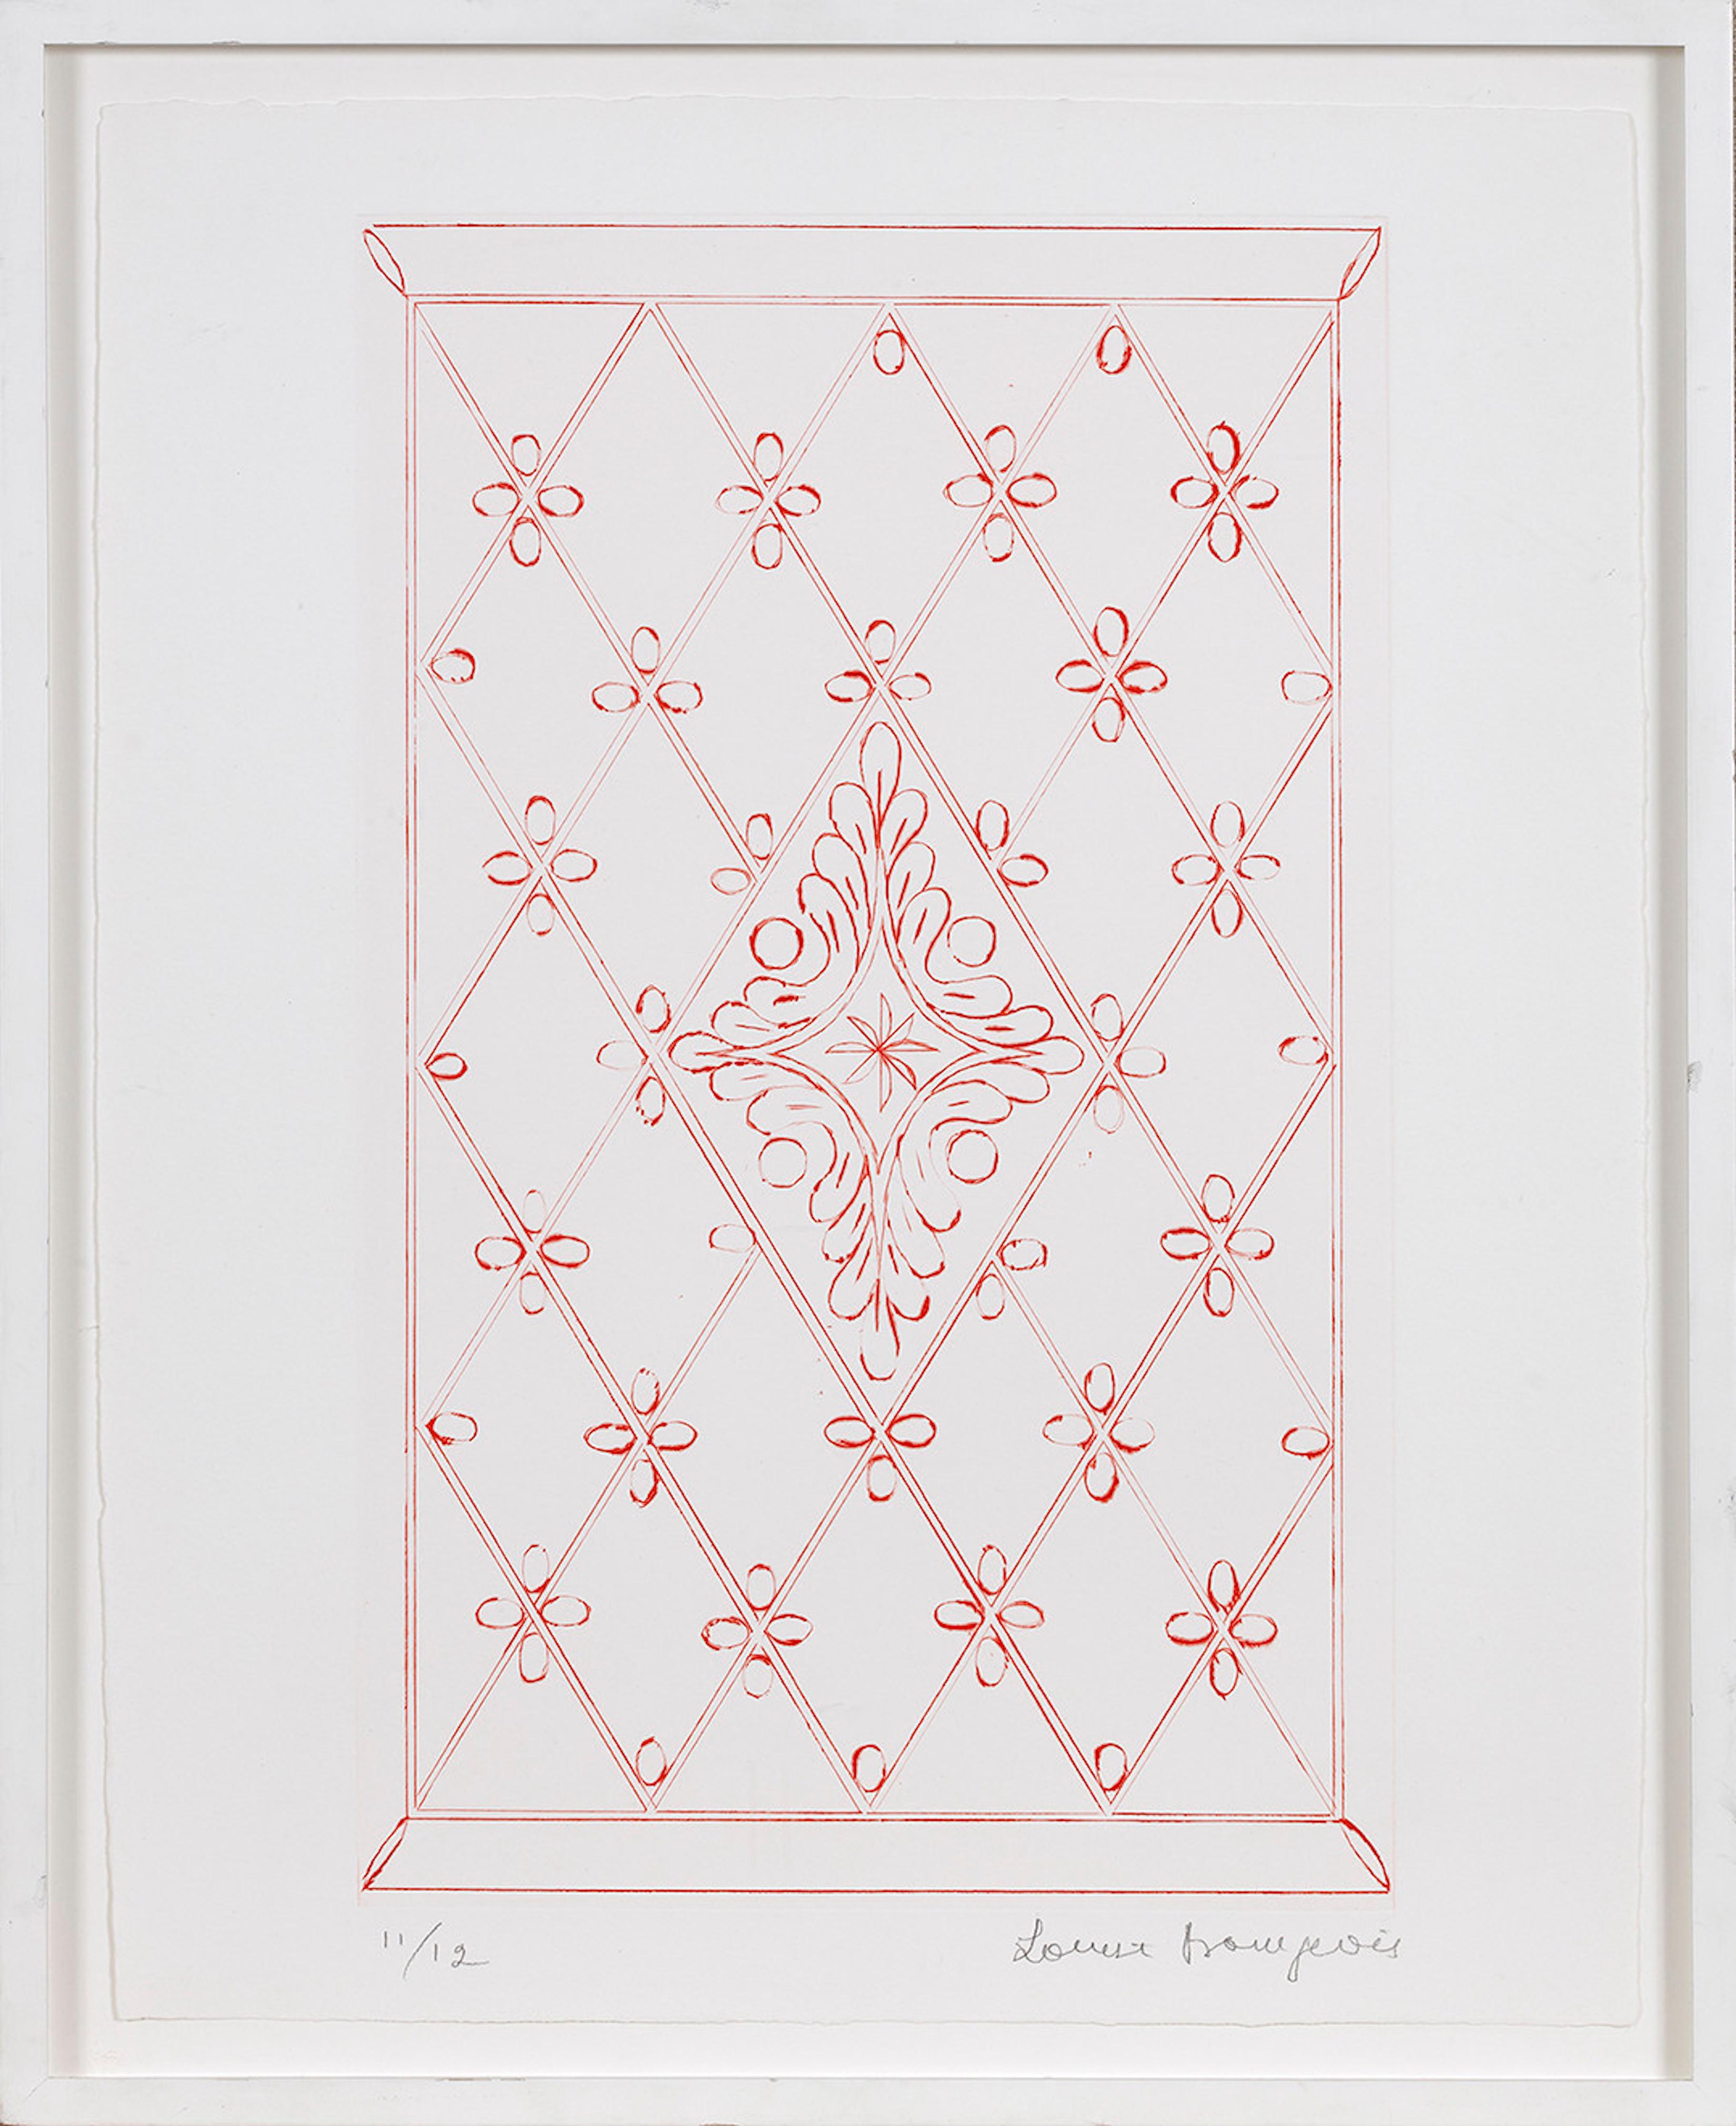 Louise Bourgeois Abstract Print – Wo ich wohne